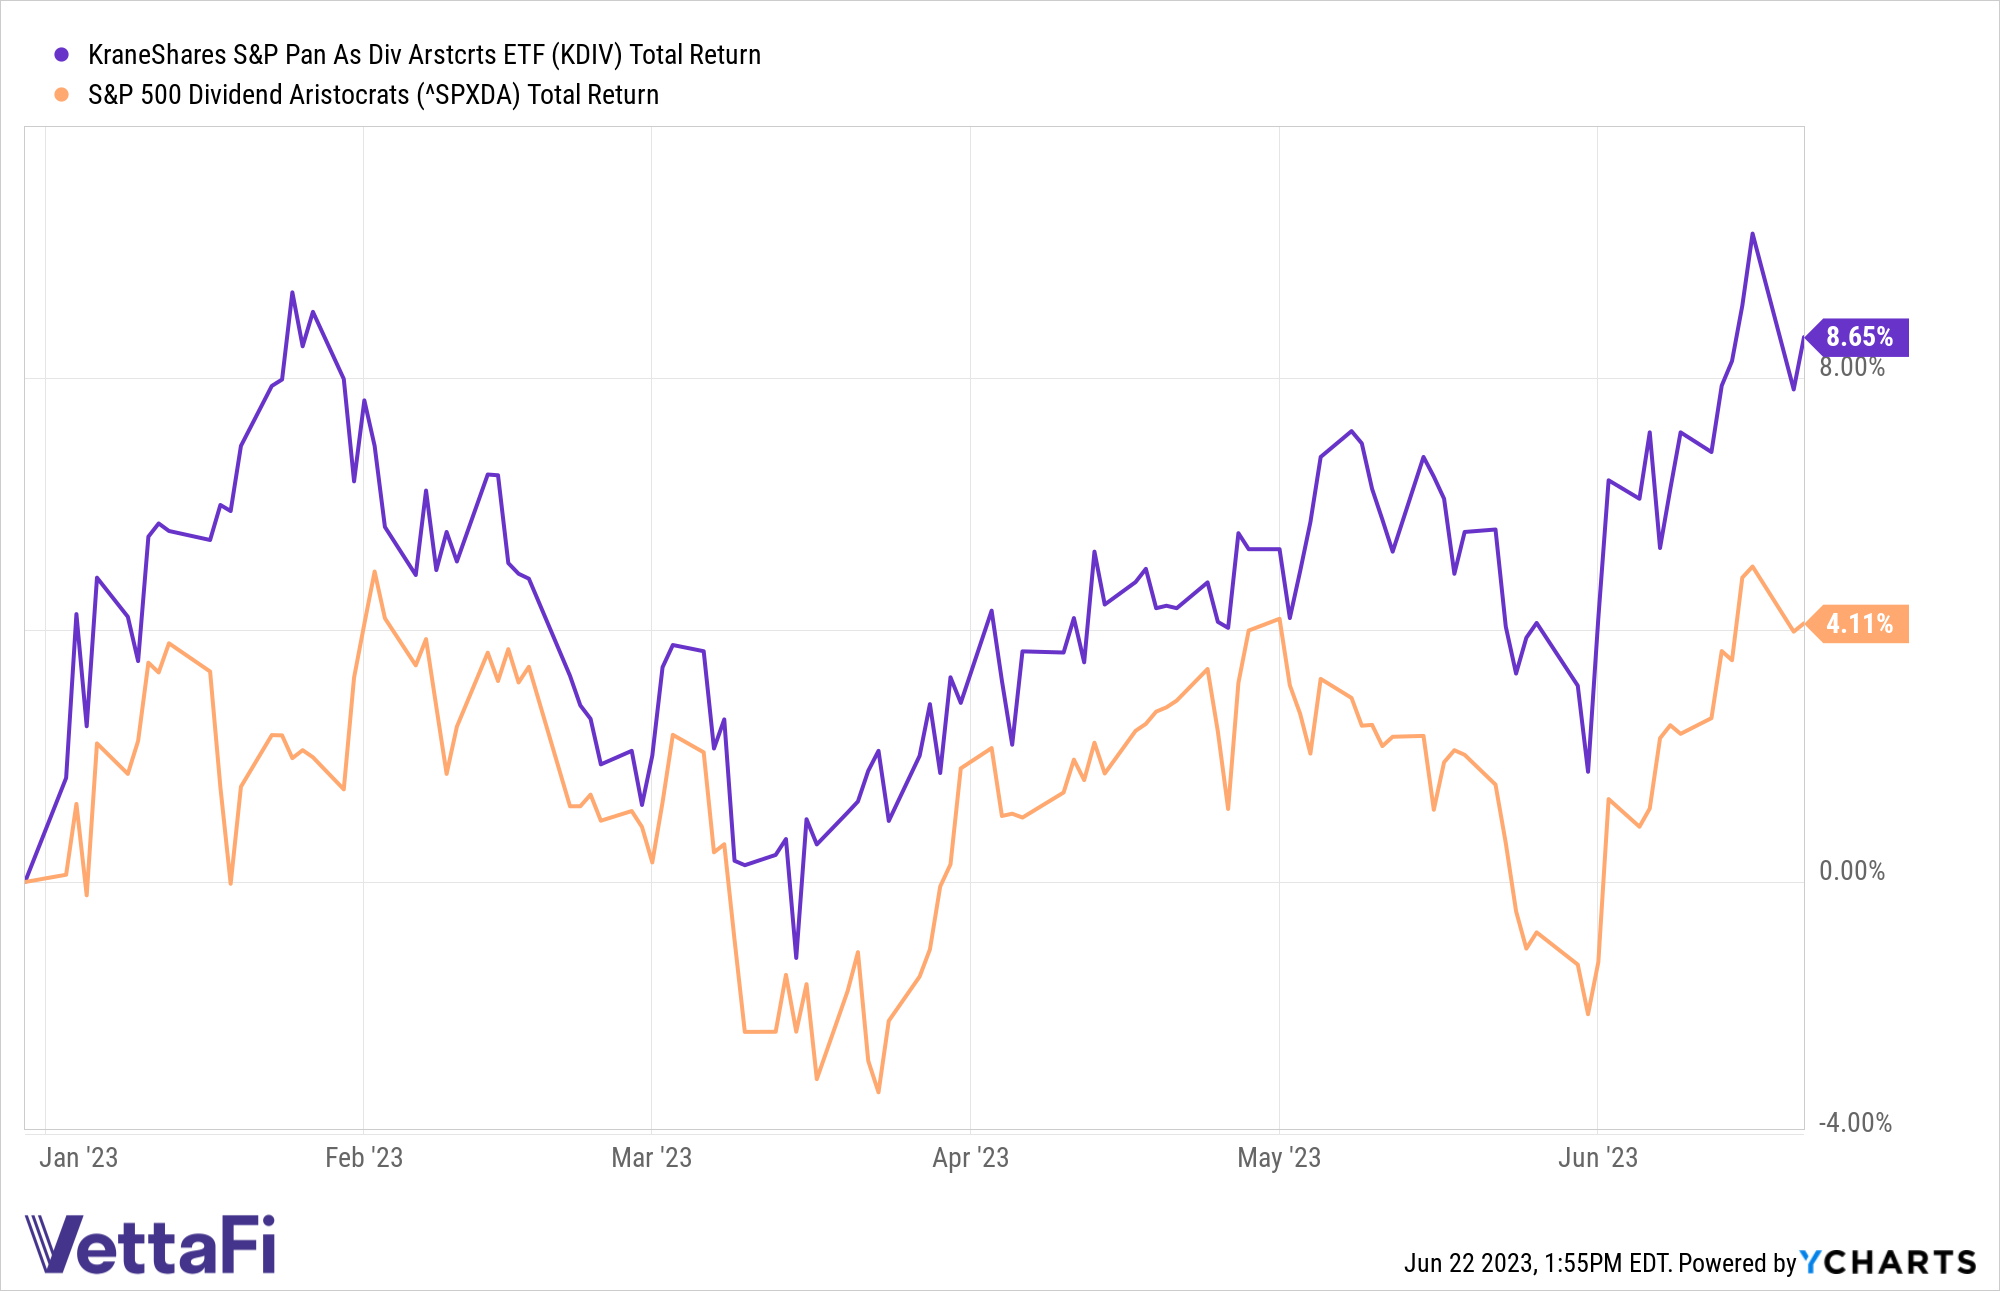 Total return chart of KDIV YTD (8.65%) compared to the S&P 500 Dividend Aristocrats Index (4.11%). 